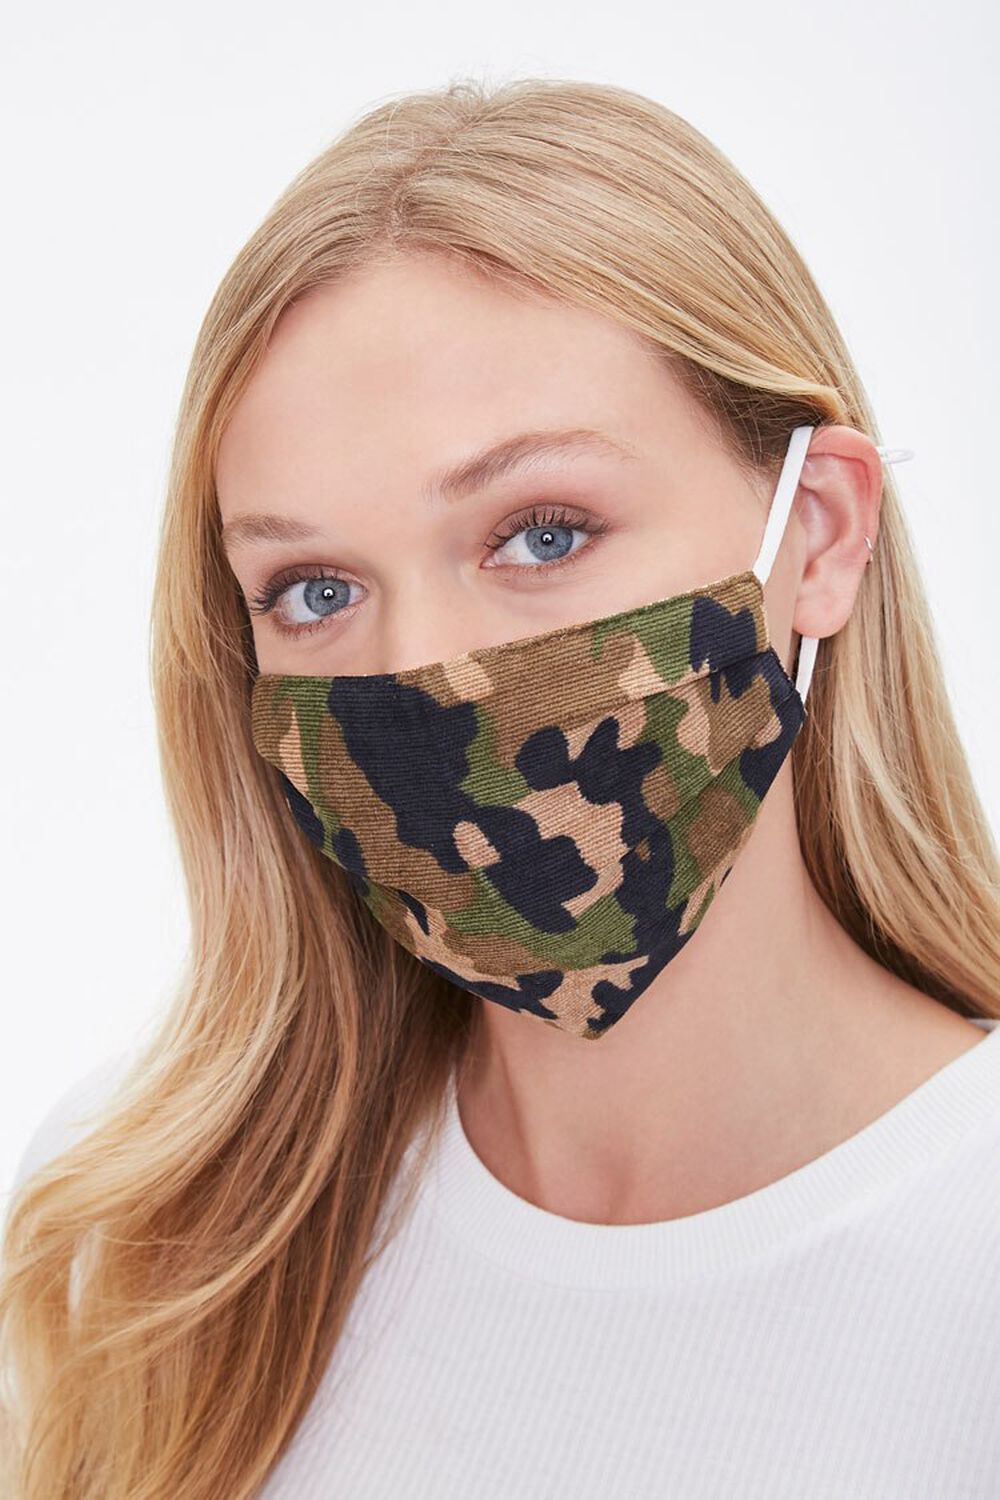 Duct tape fixes everything covid face mask Mask for Sale by Kurdttime